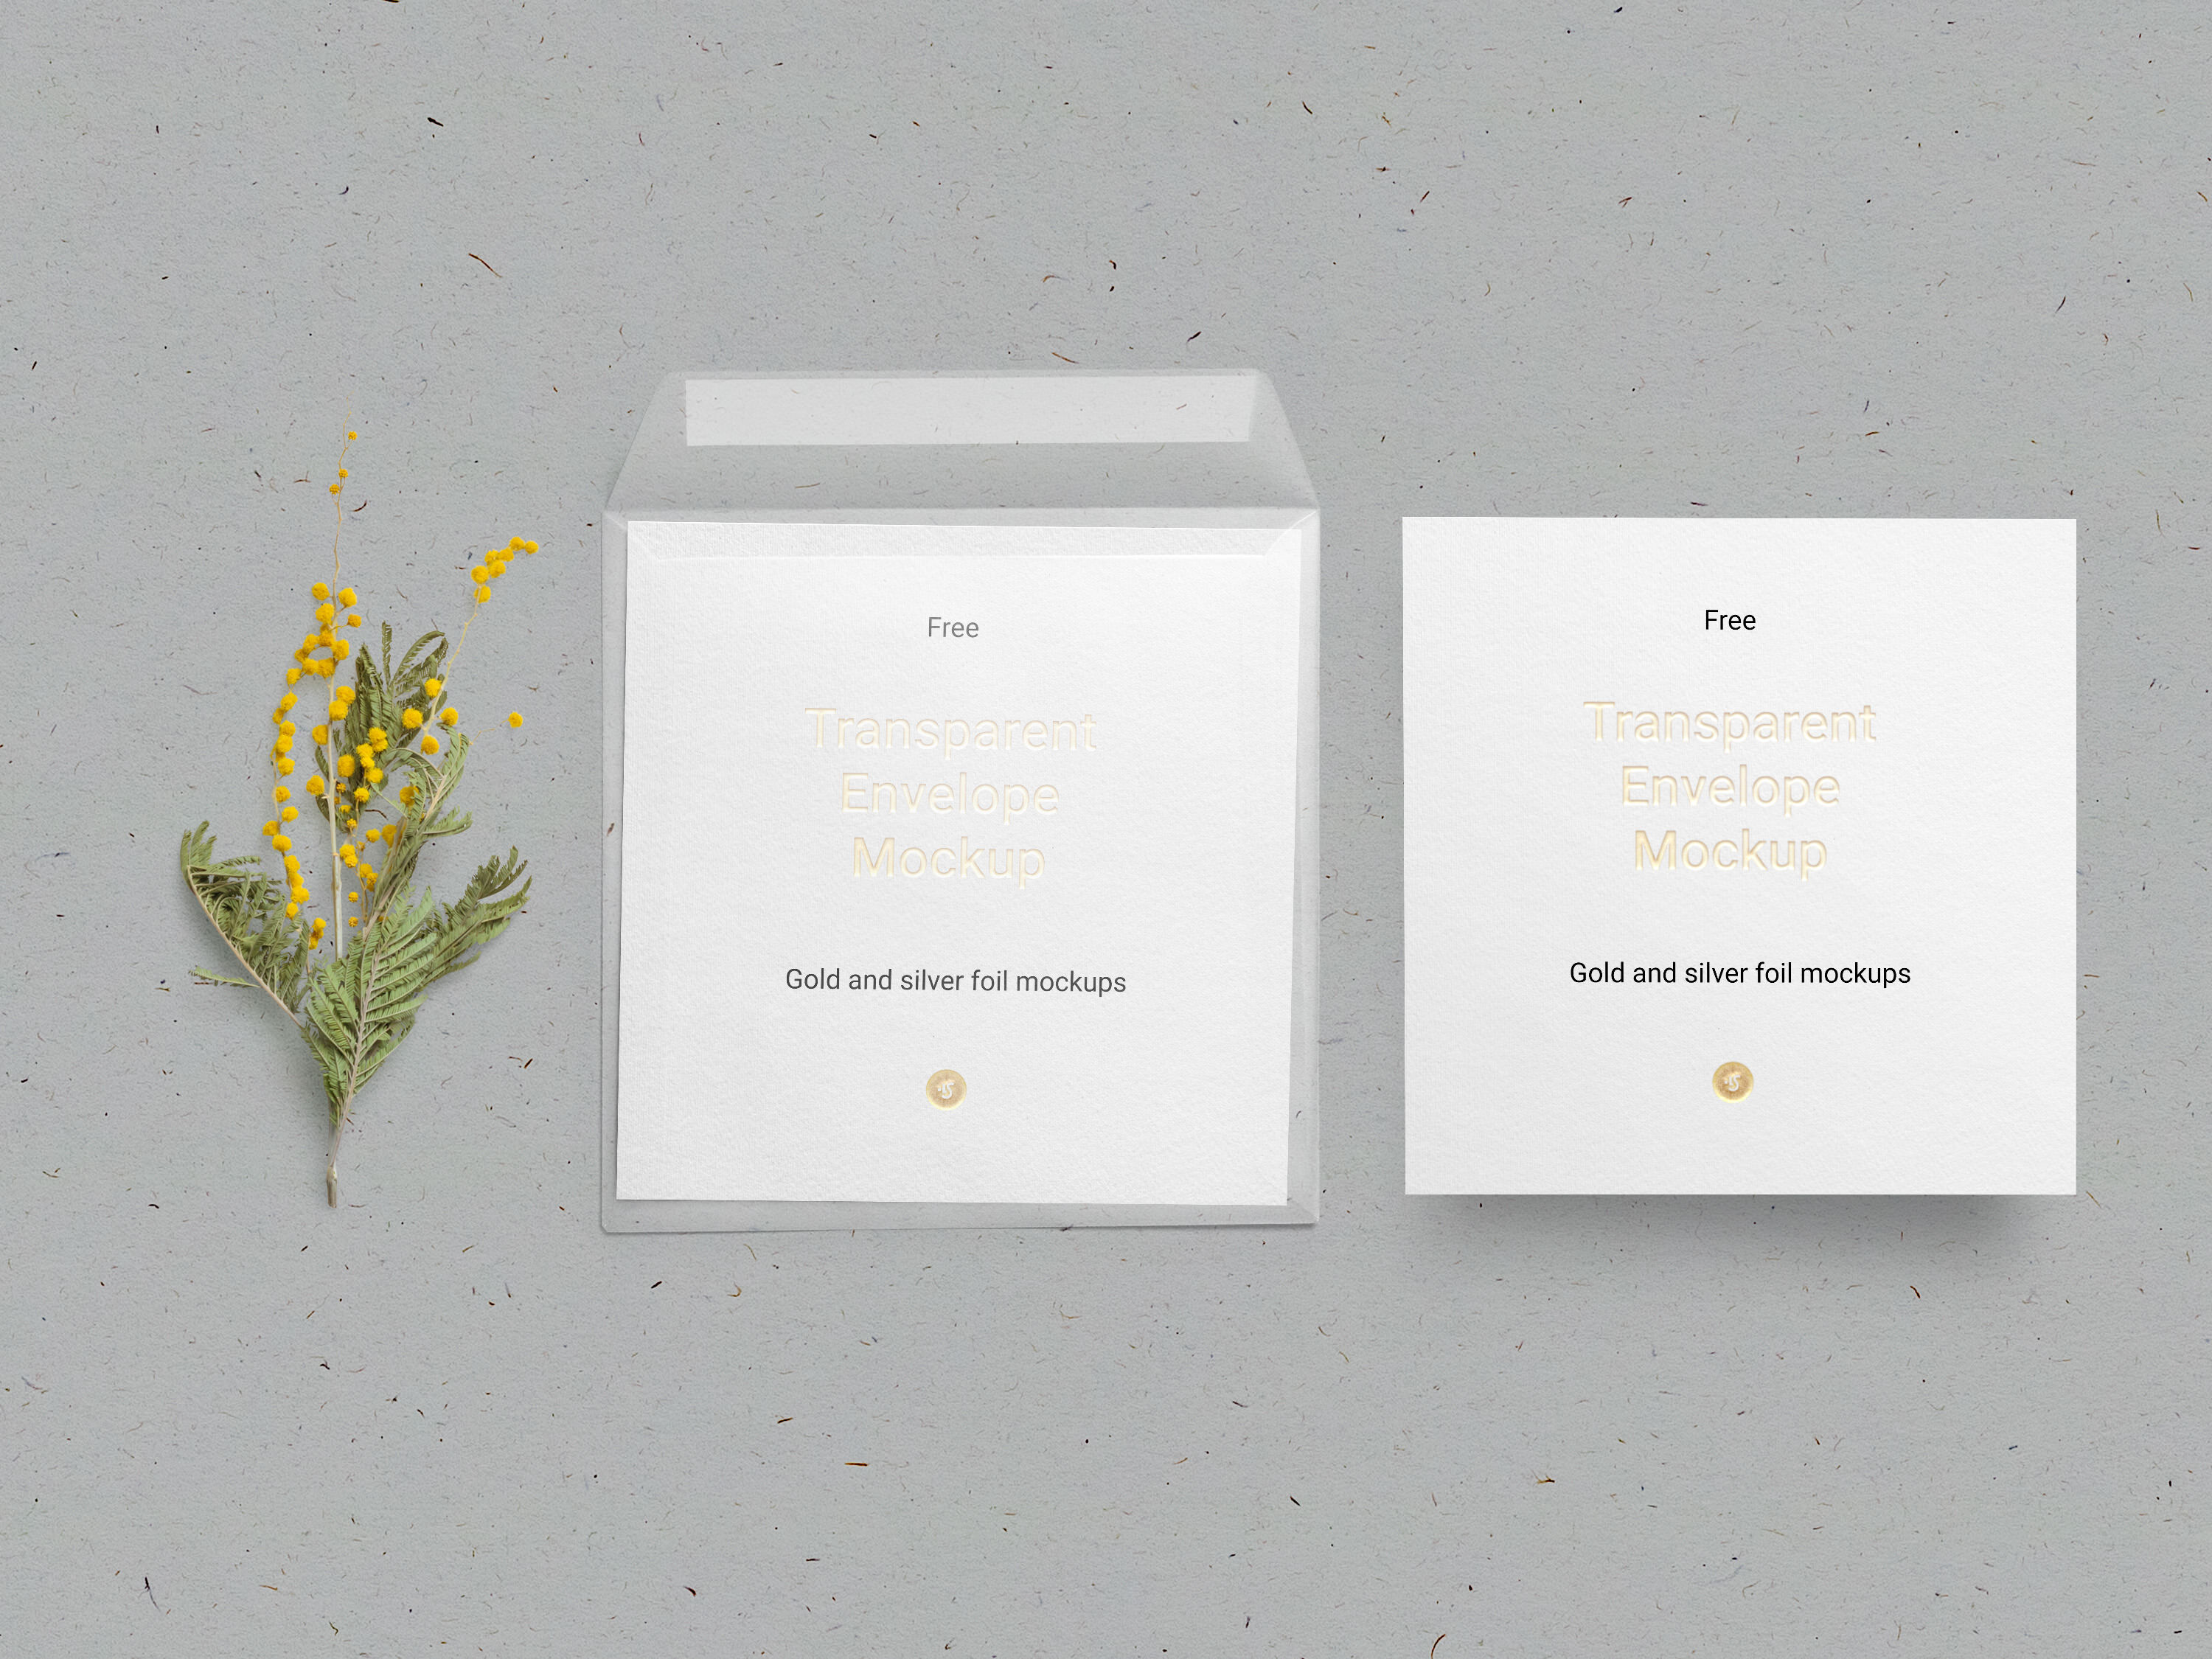 Cards and Transparent Envelop Decorated with Flower and Overlaid Shadow Mockup FREE PSD